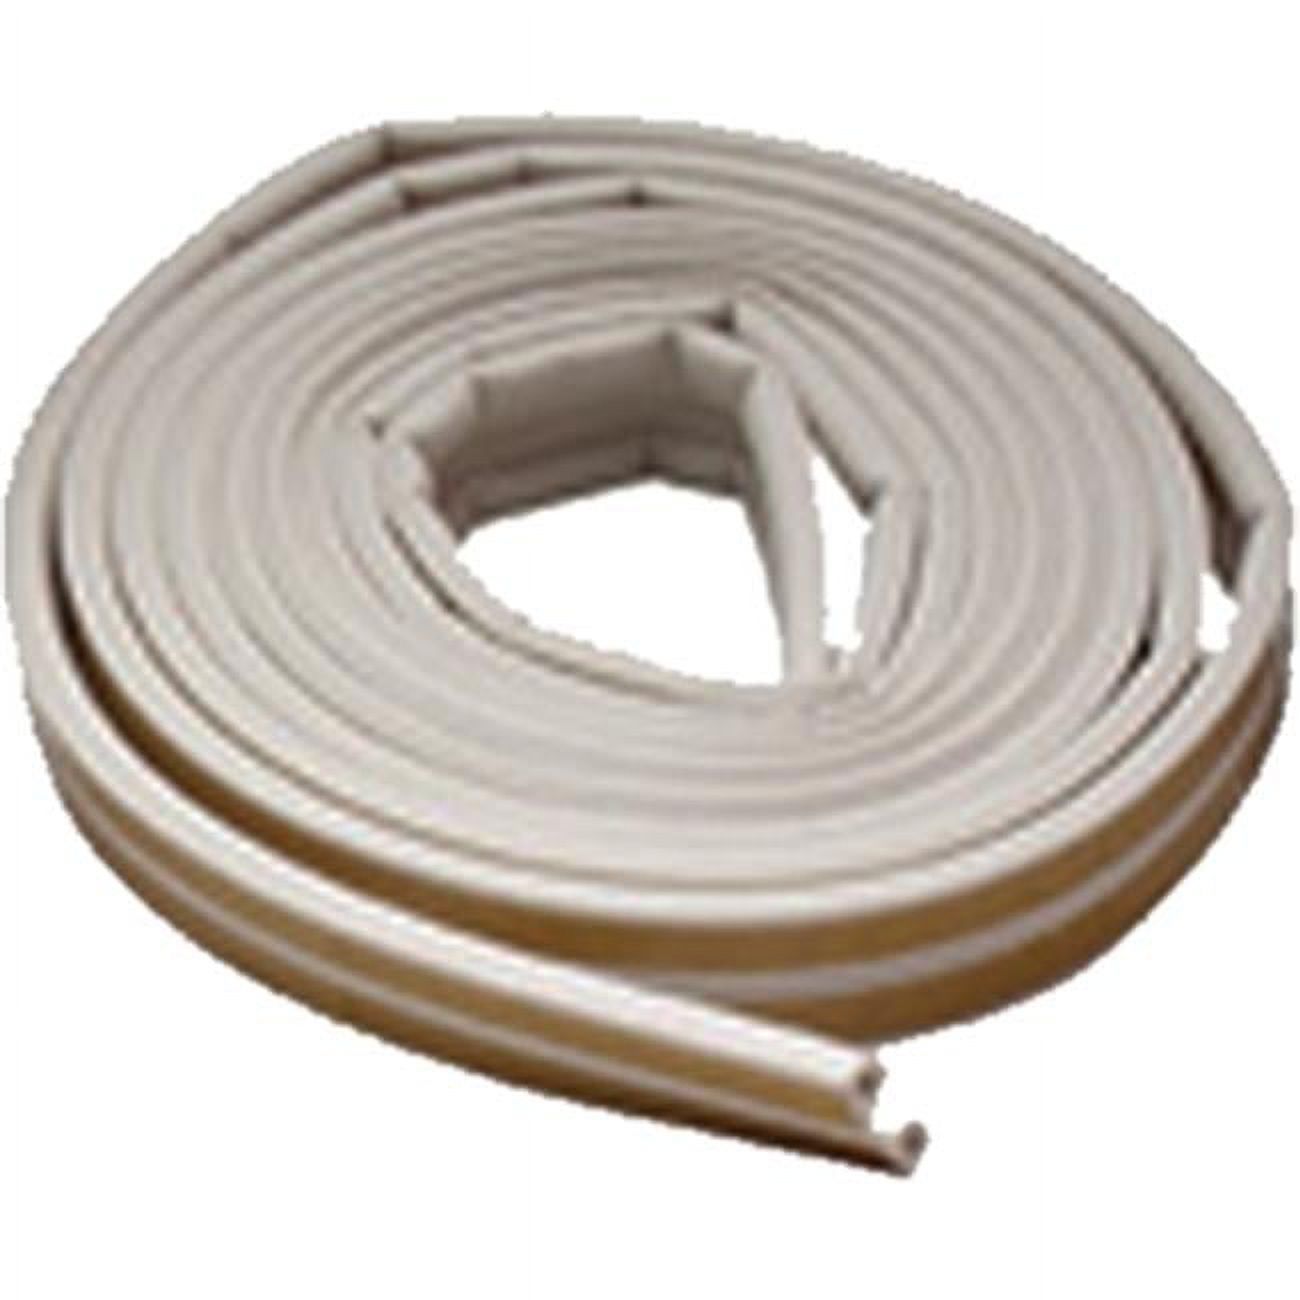 M-D Building Products 2576 EPDM Weatherstrip Seal Strips 7/32 inch x 3/8 inch - image 1 of 2